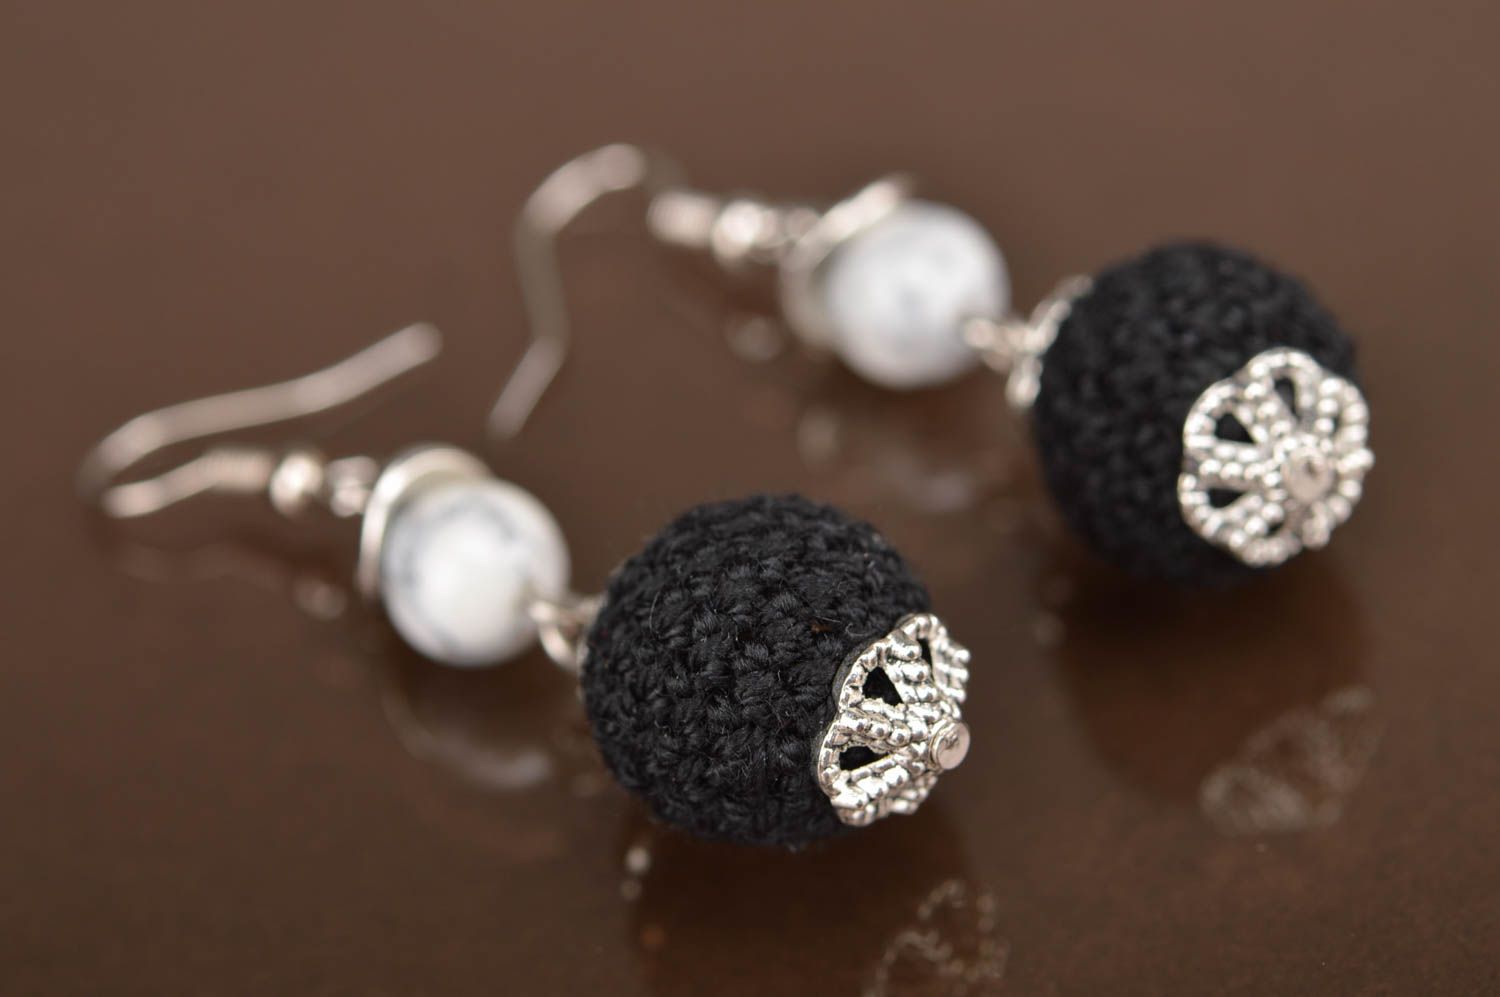 Unusual beautiful handmade earrings with crocheted over beads black and white photo 3